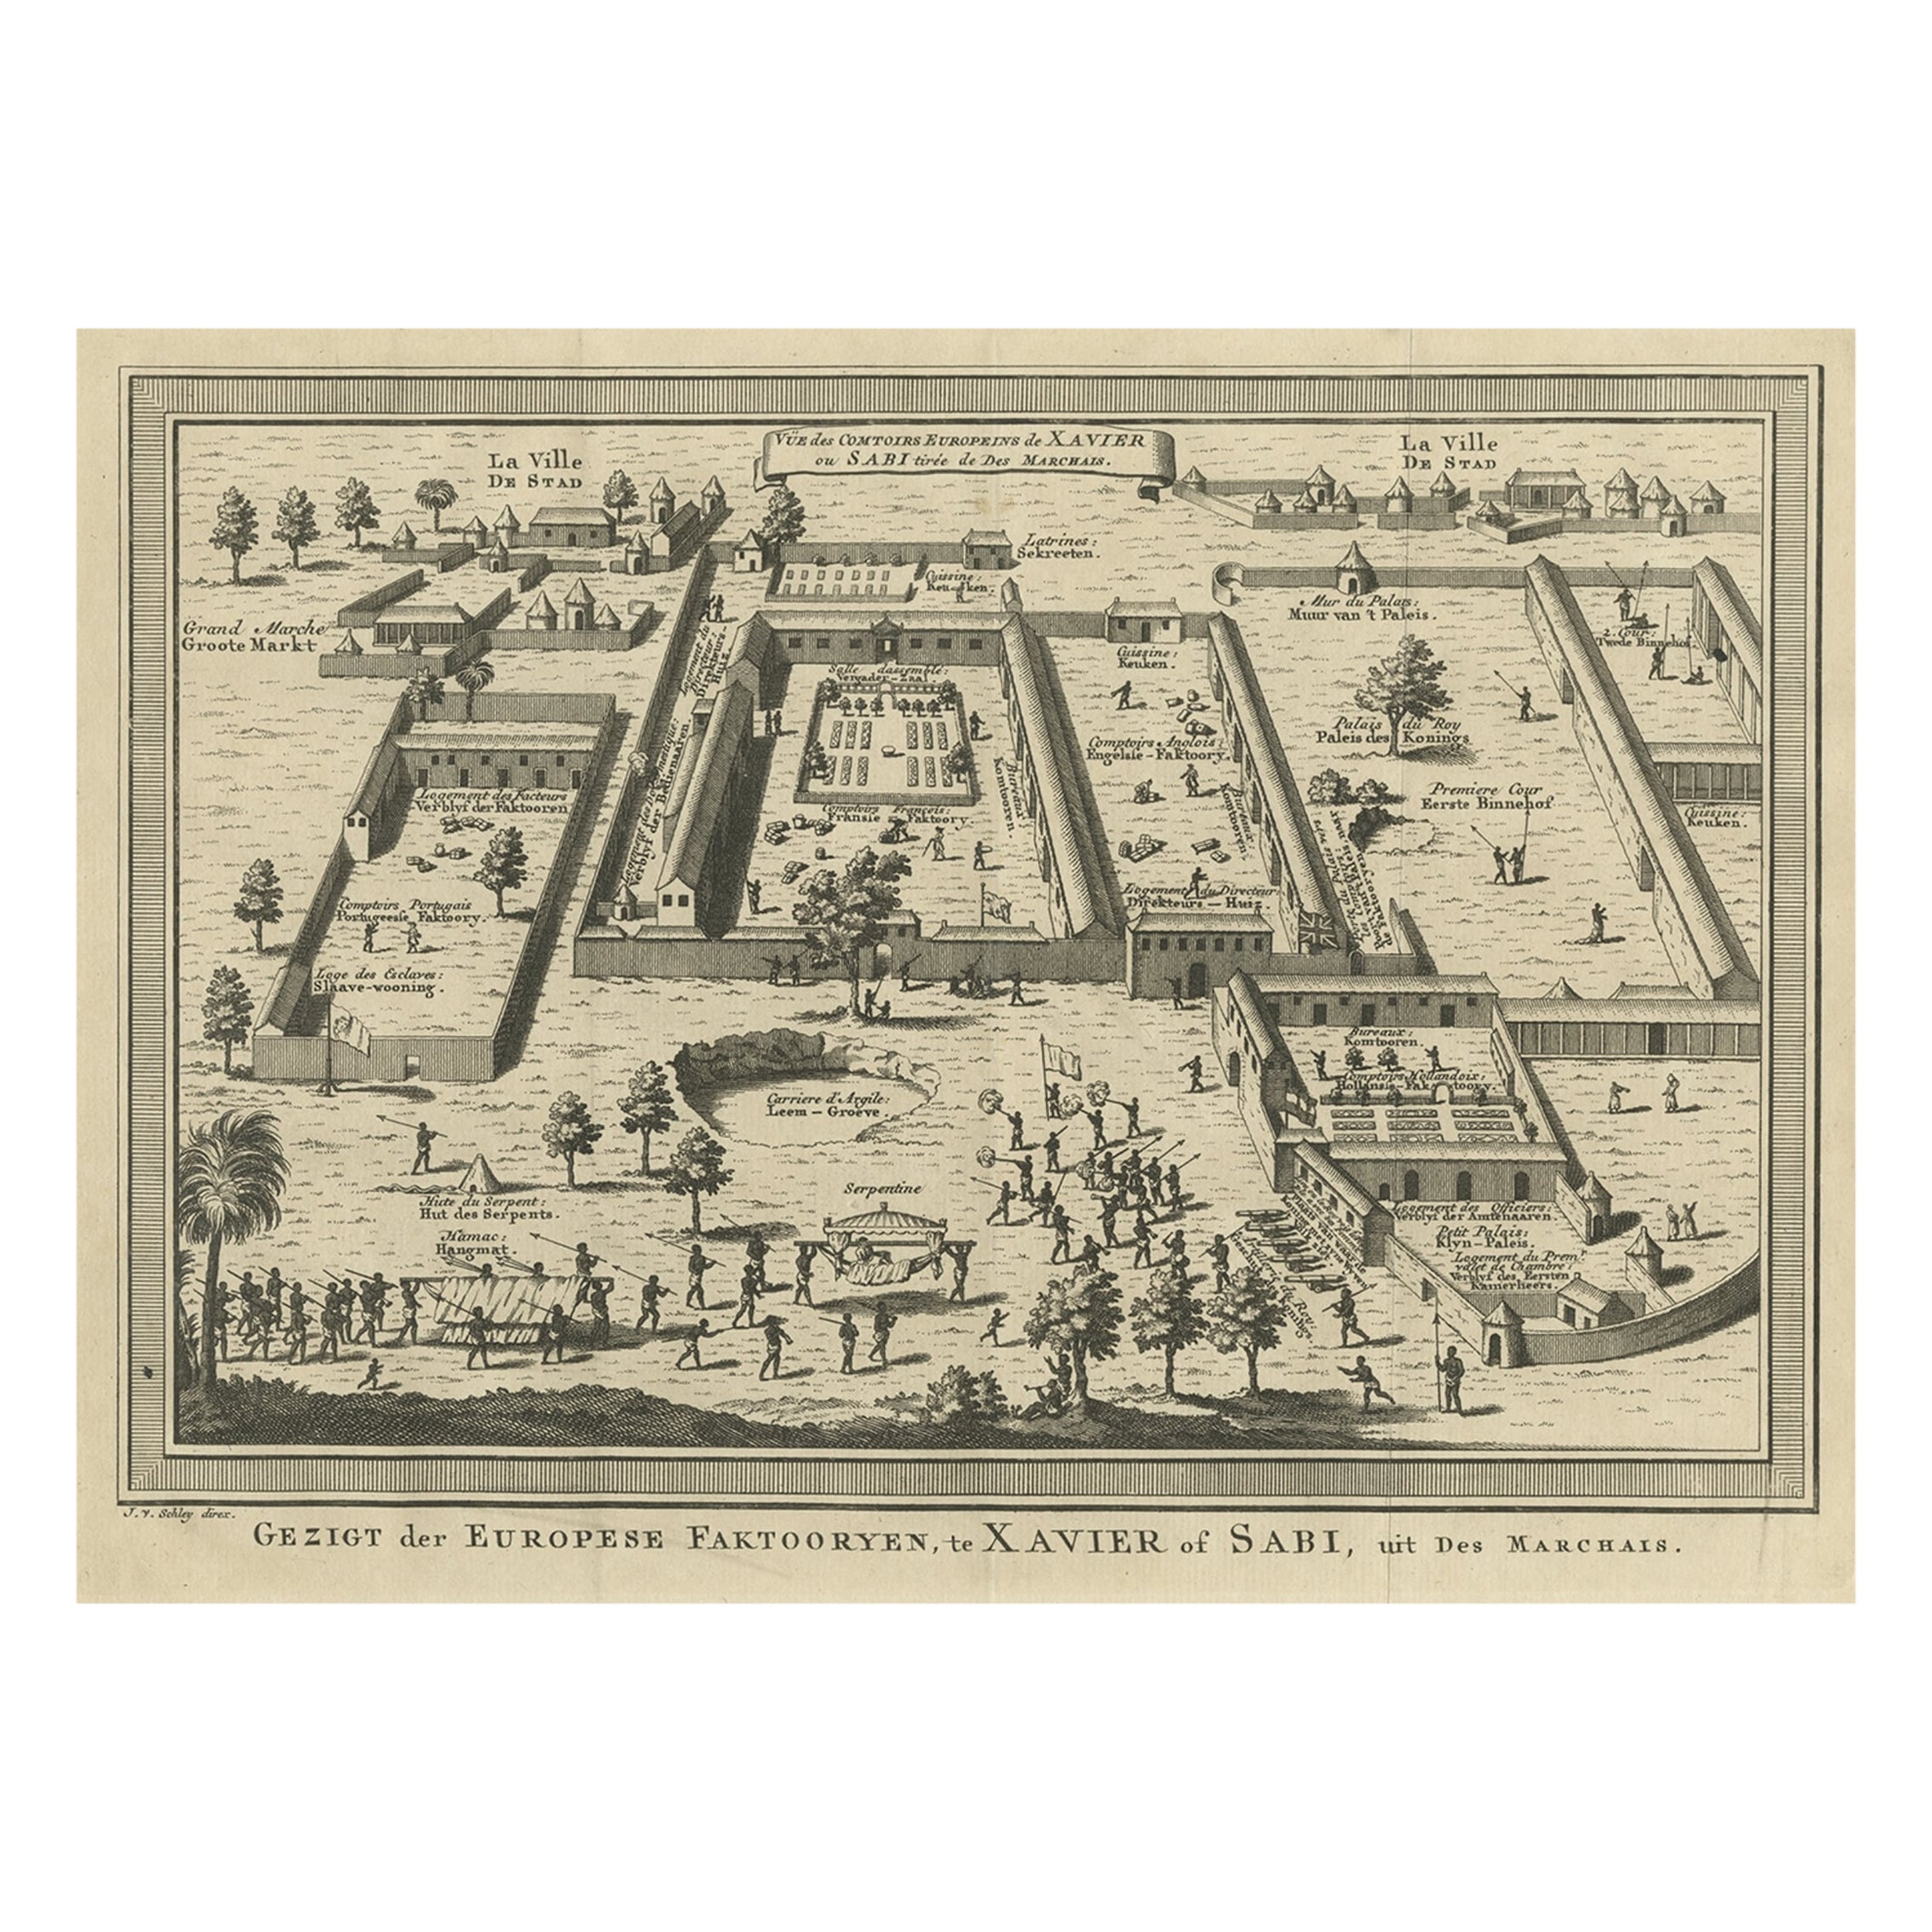 Old Bird's Eye View of the European Trading Posts at Sabi, Benin, Africa, 1748 For Sale